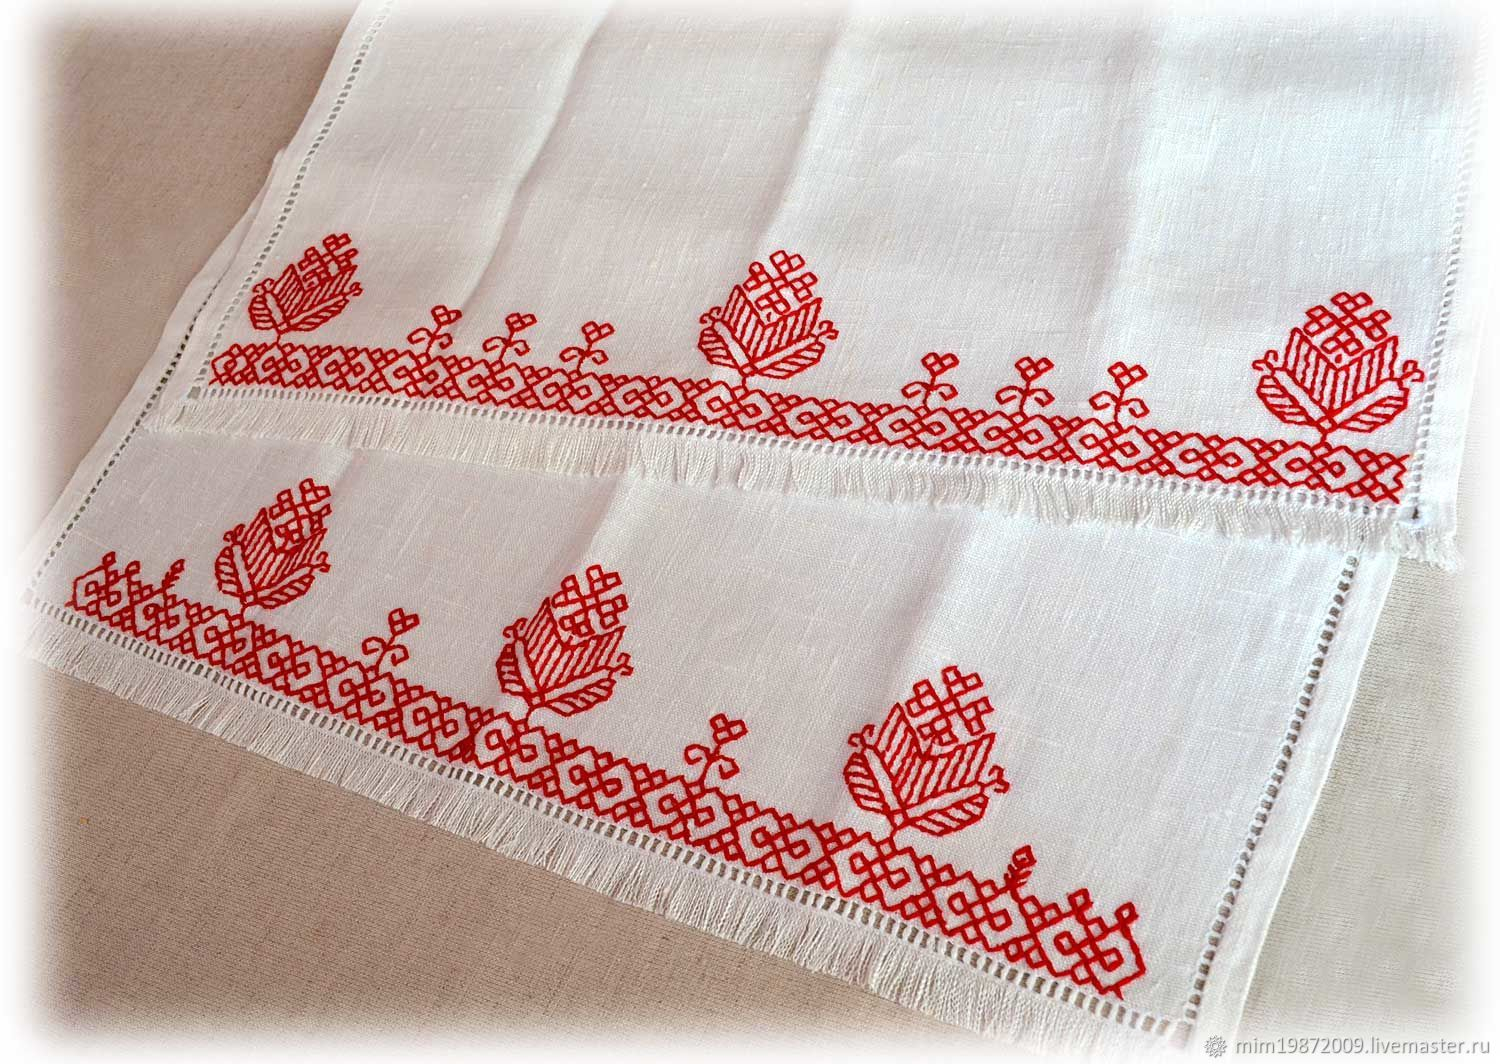 Tablecloth Hand Embroidery Patterns Track Towel Hand Embroidery Hemstitch White Linen Red Shop Online On Livemaster With Shipping Gmzv7com Krasnodar